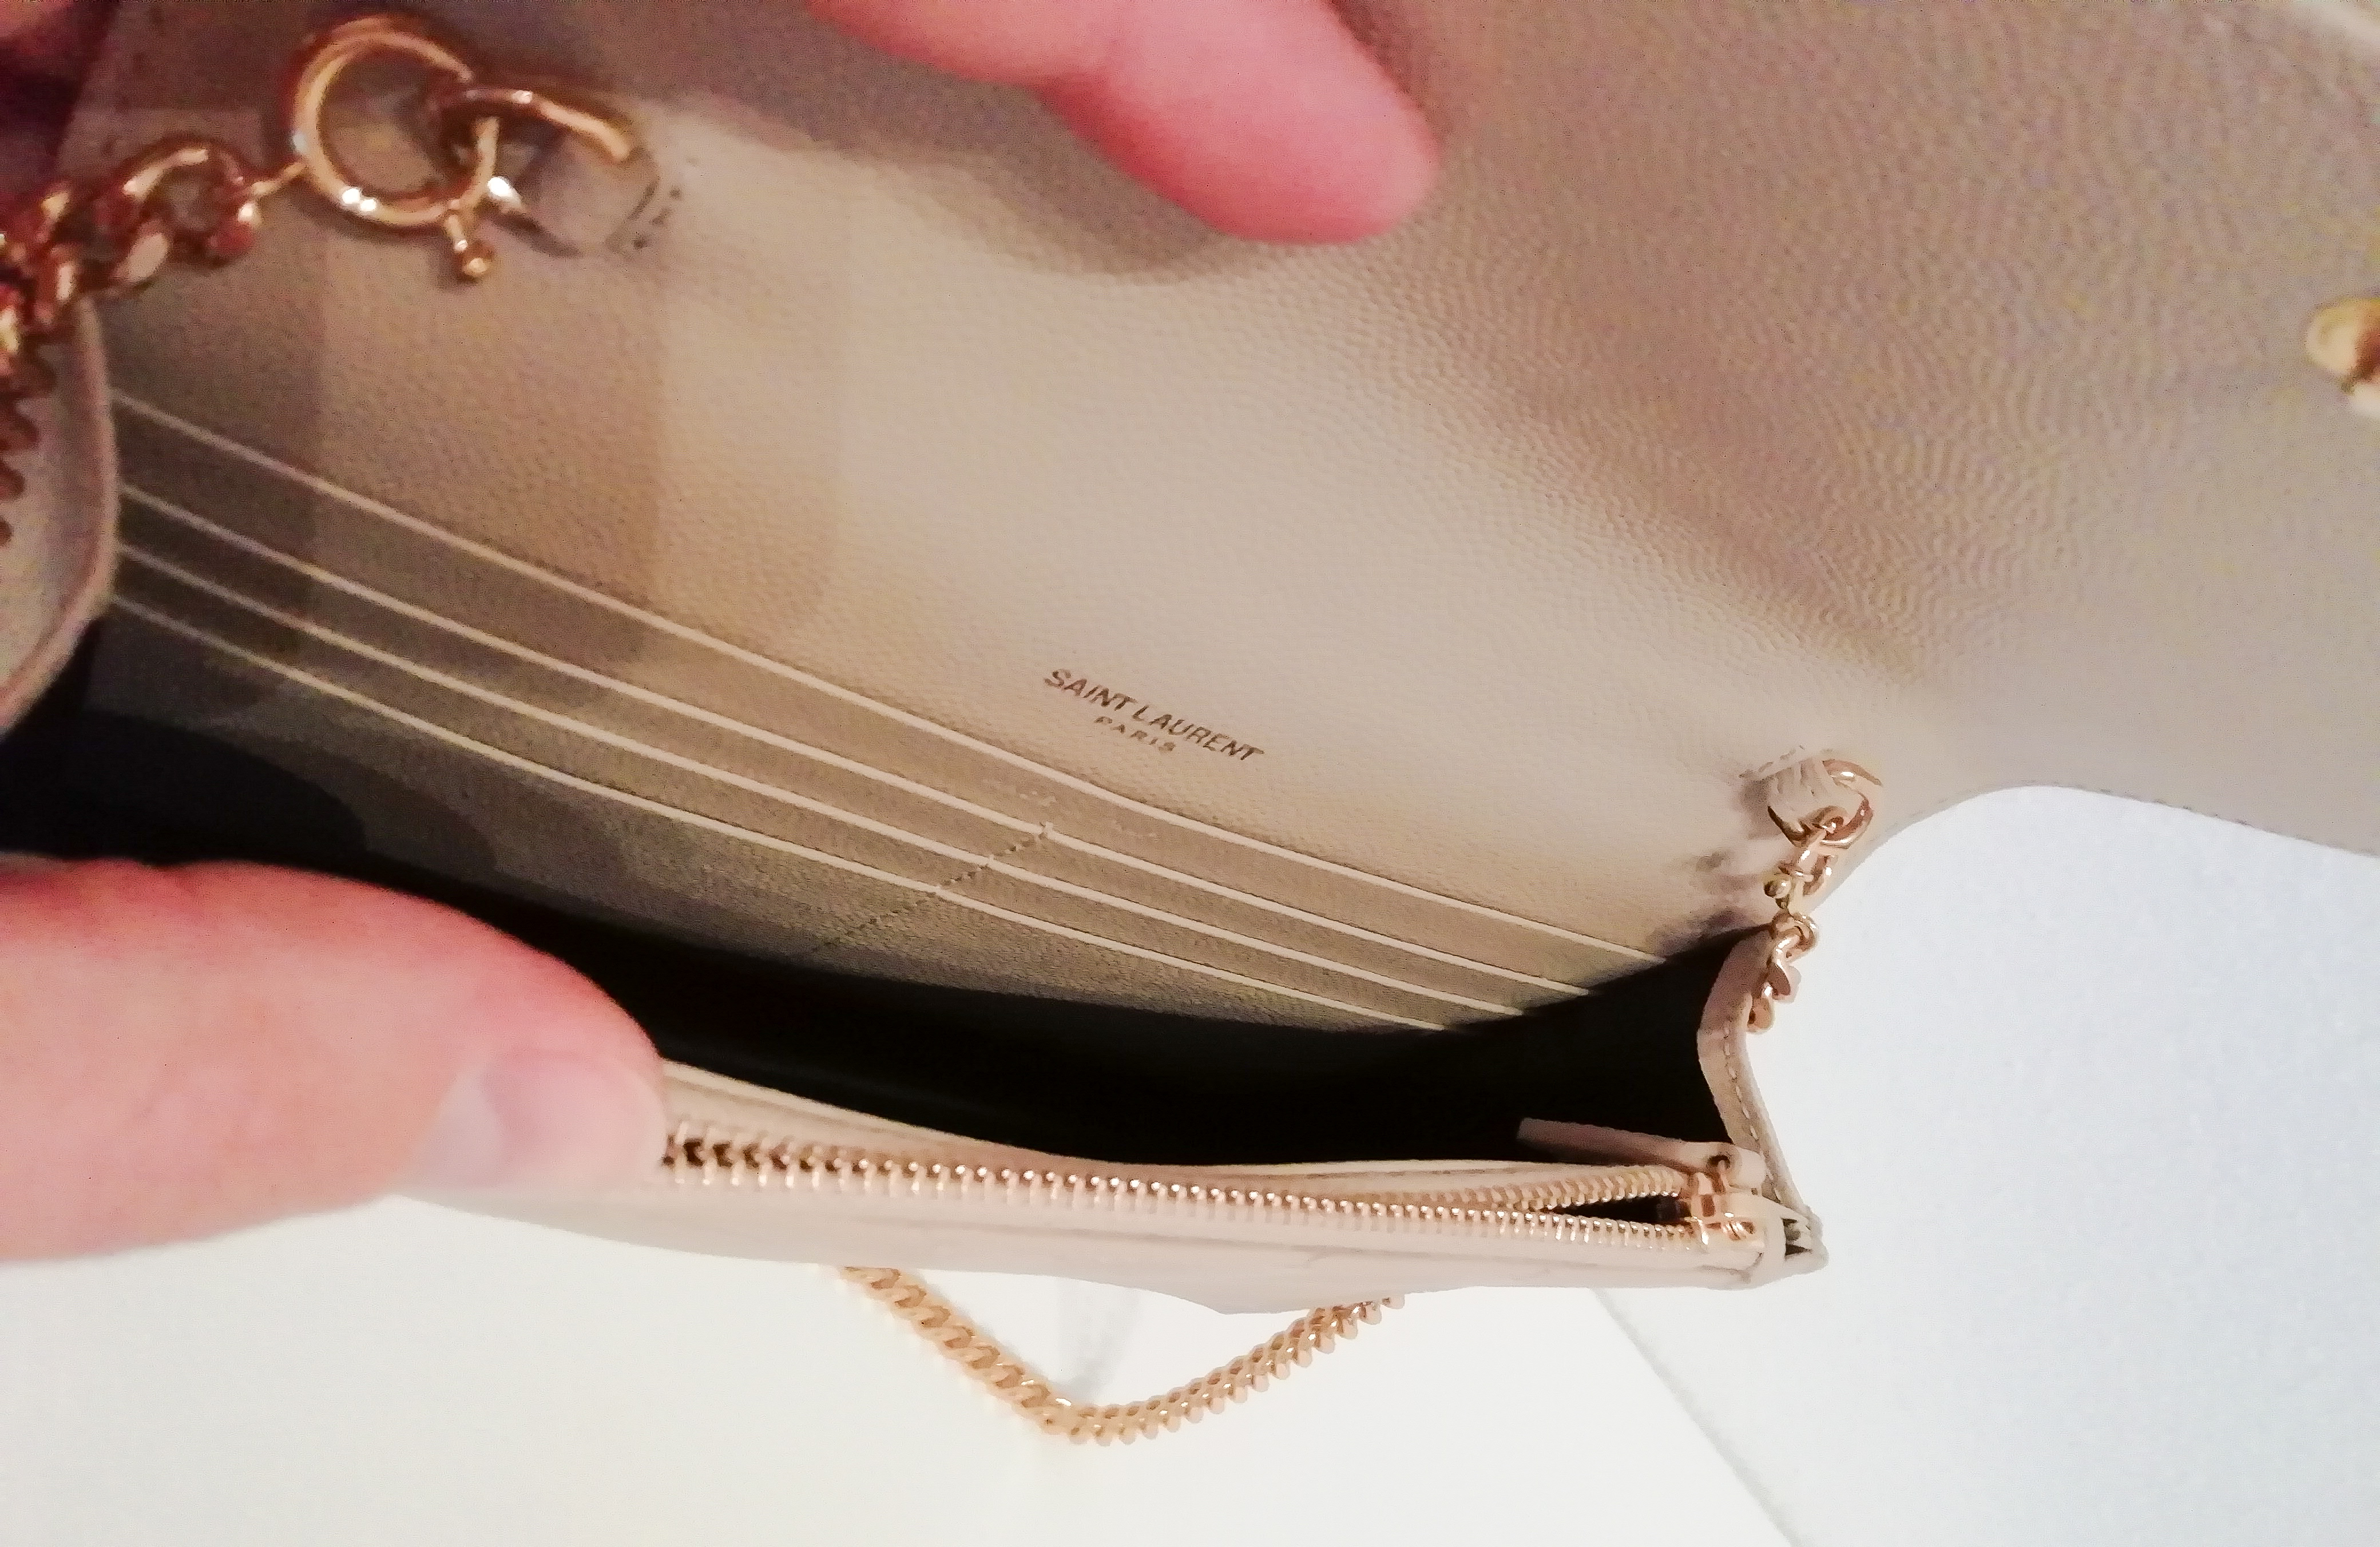 First impressions review: YSL Monogram Wallet On Chain – Buy the goddamn bag